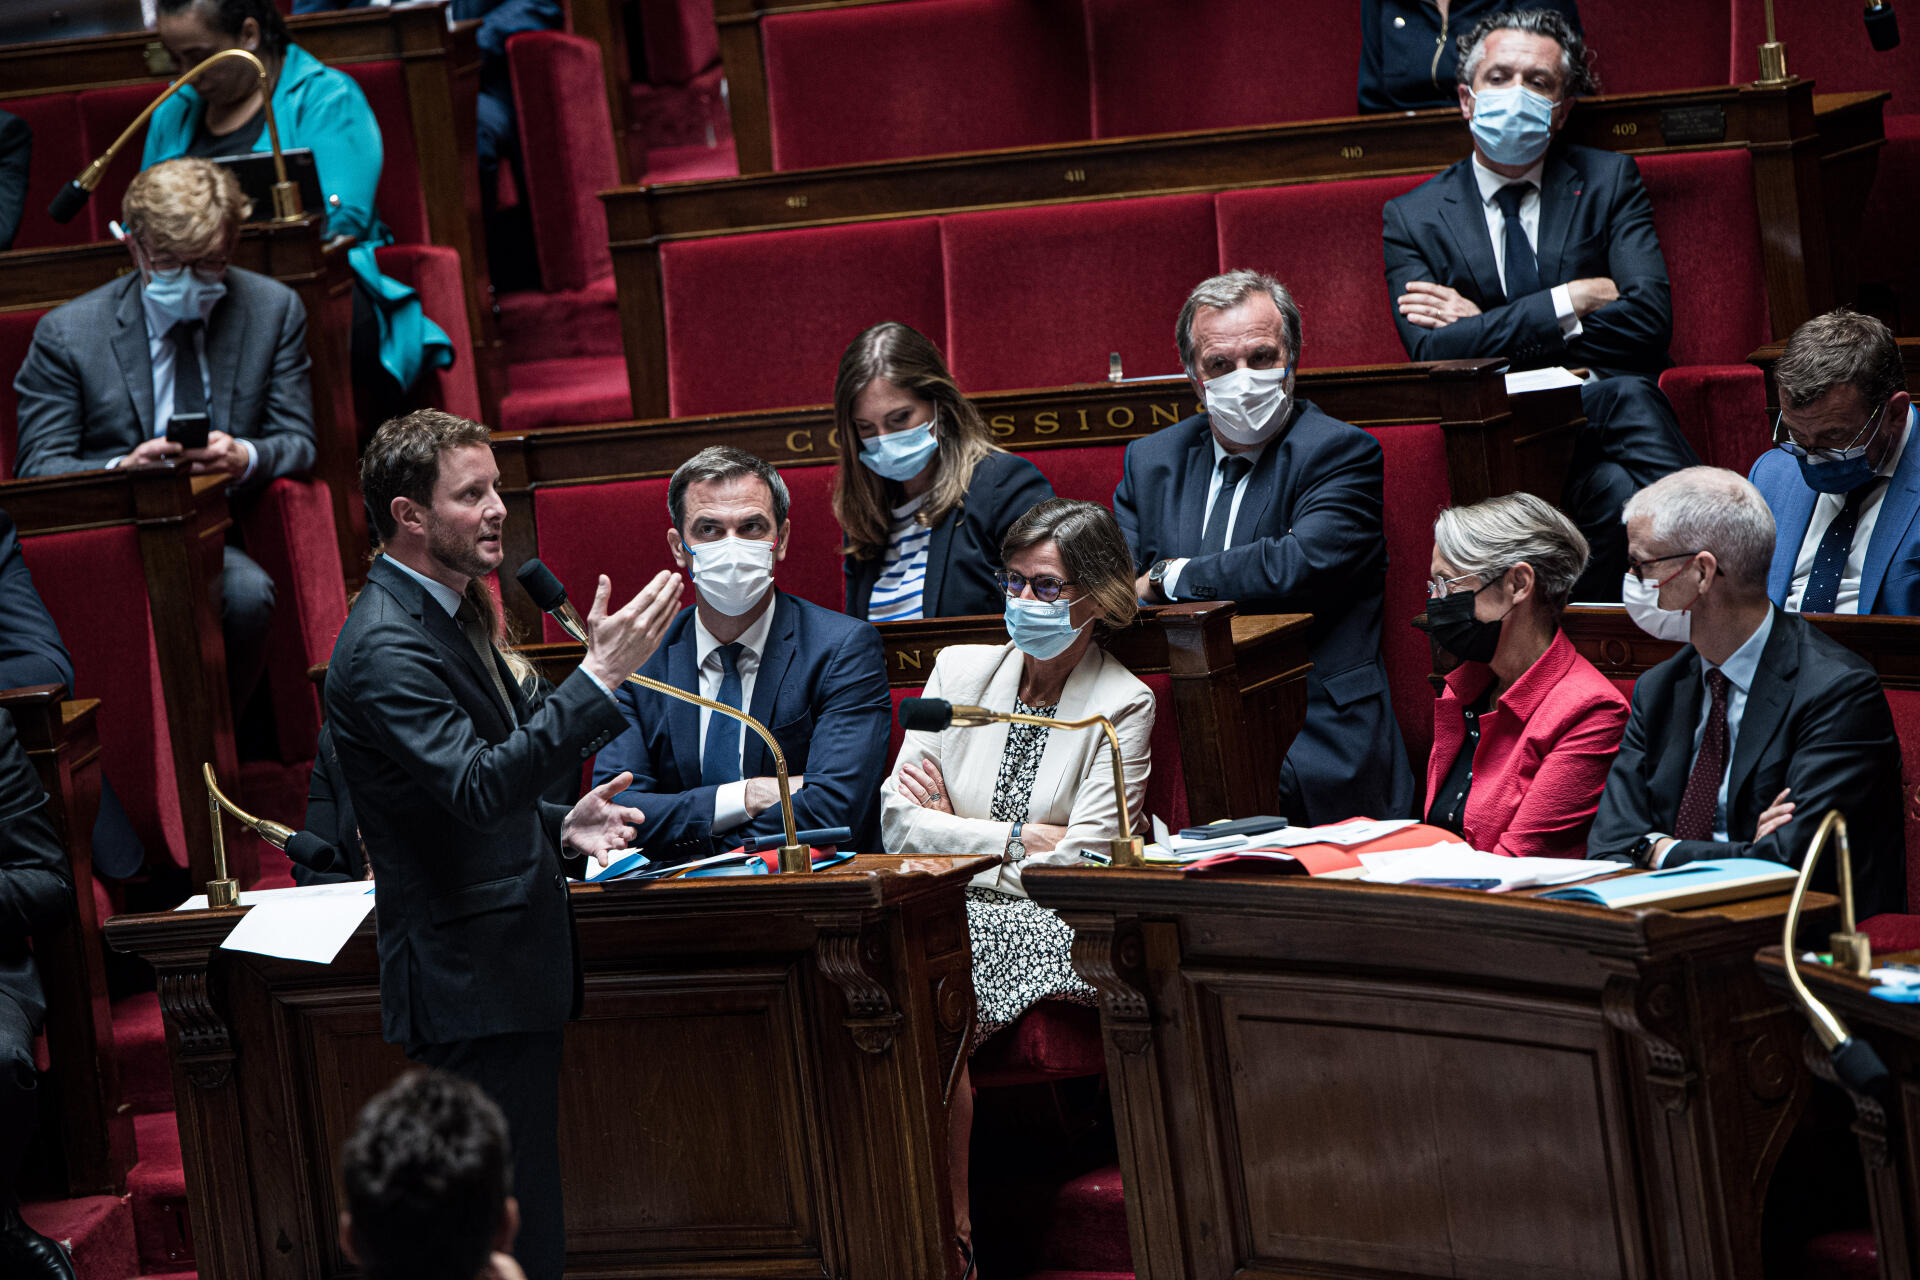 The vice minister in charge of transport, Clément Beaune, during the government question session on July 26, 2022.